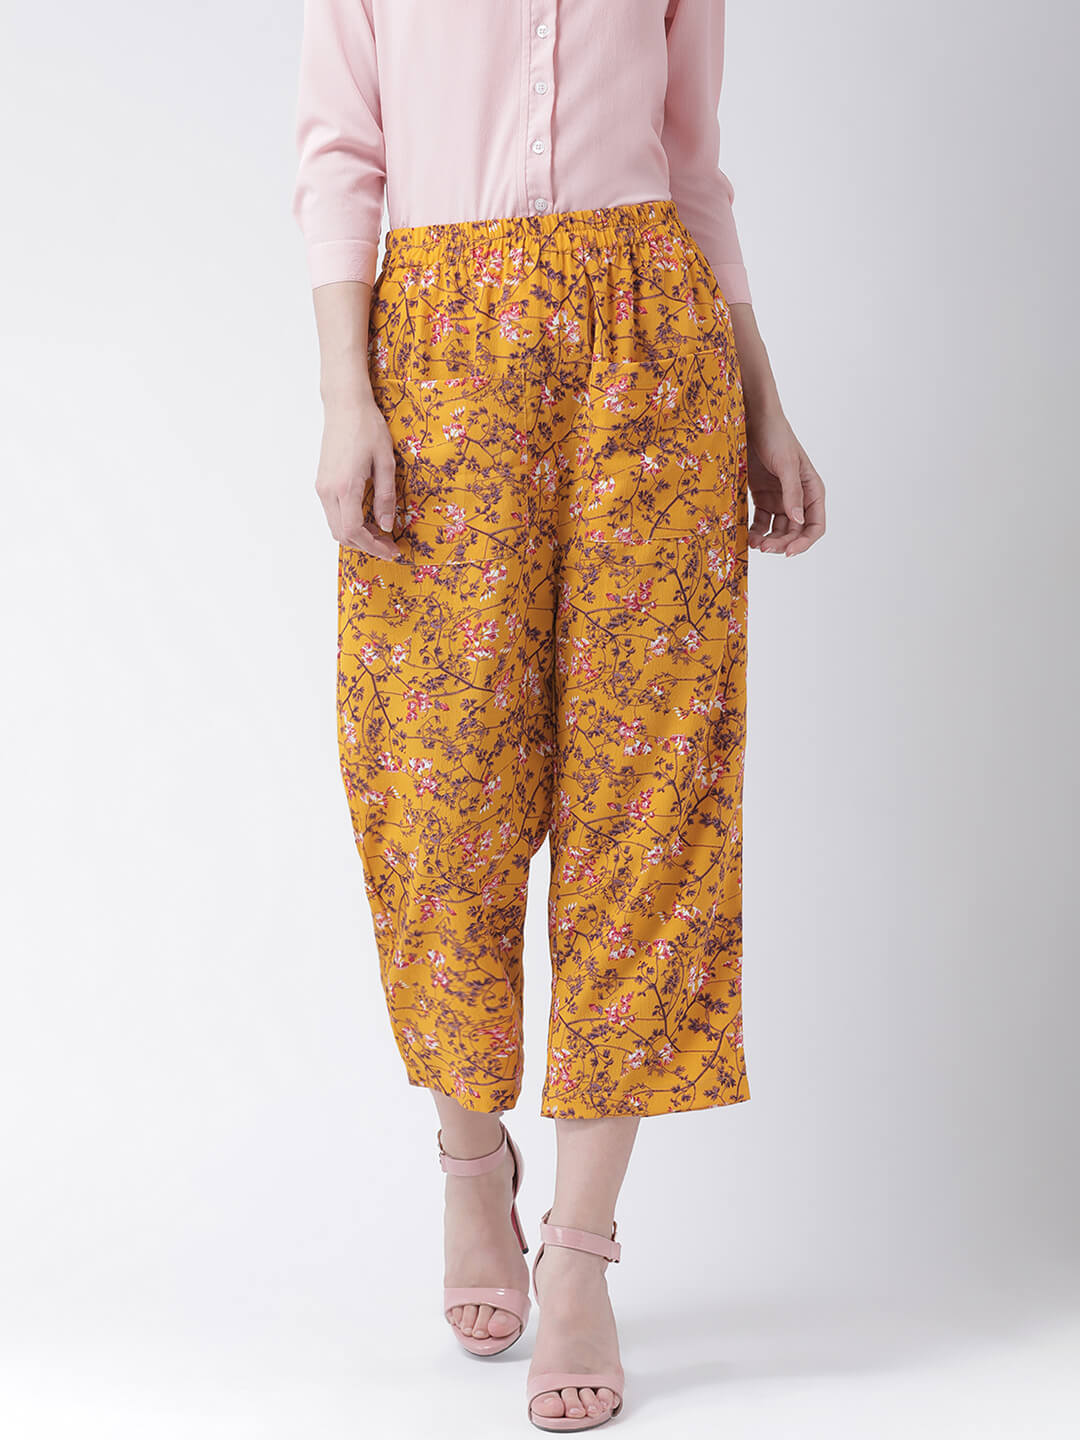 The Vanca'S Floral Culottes With Elasticated Waist And Two Pockets In The Front